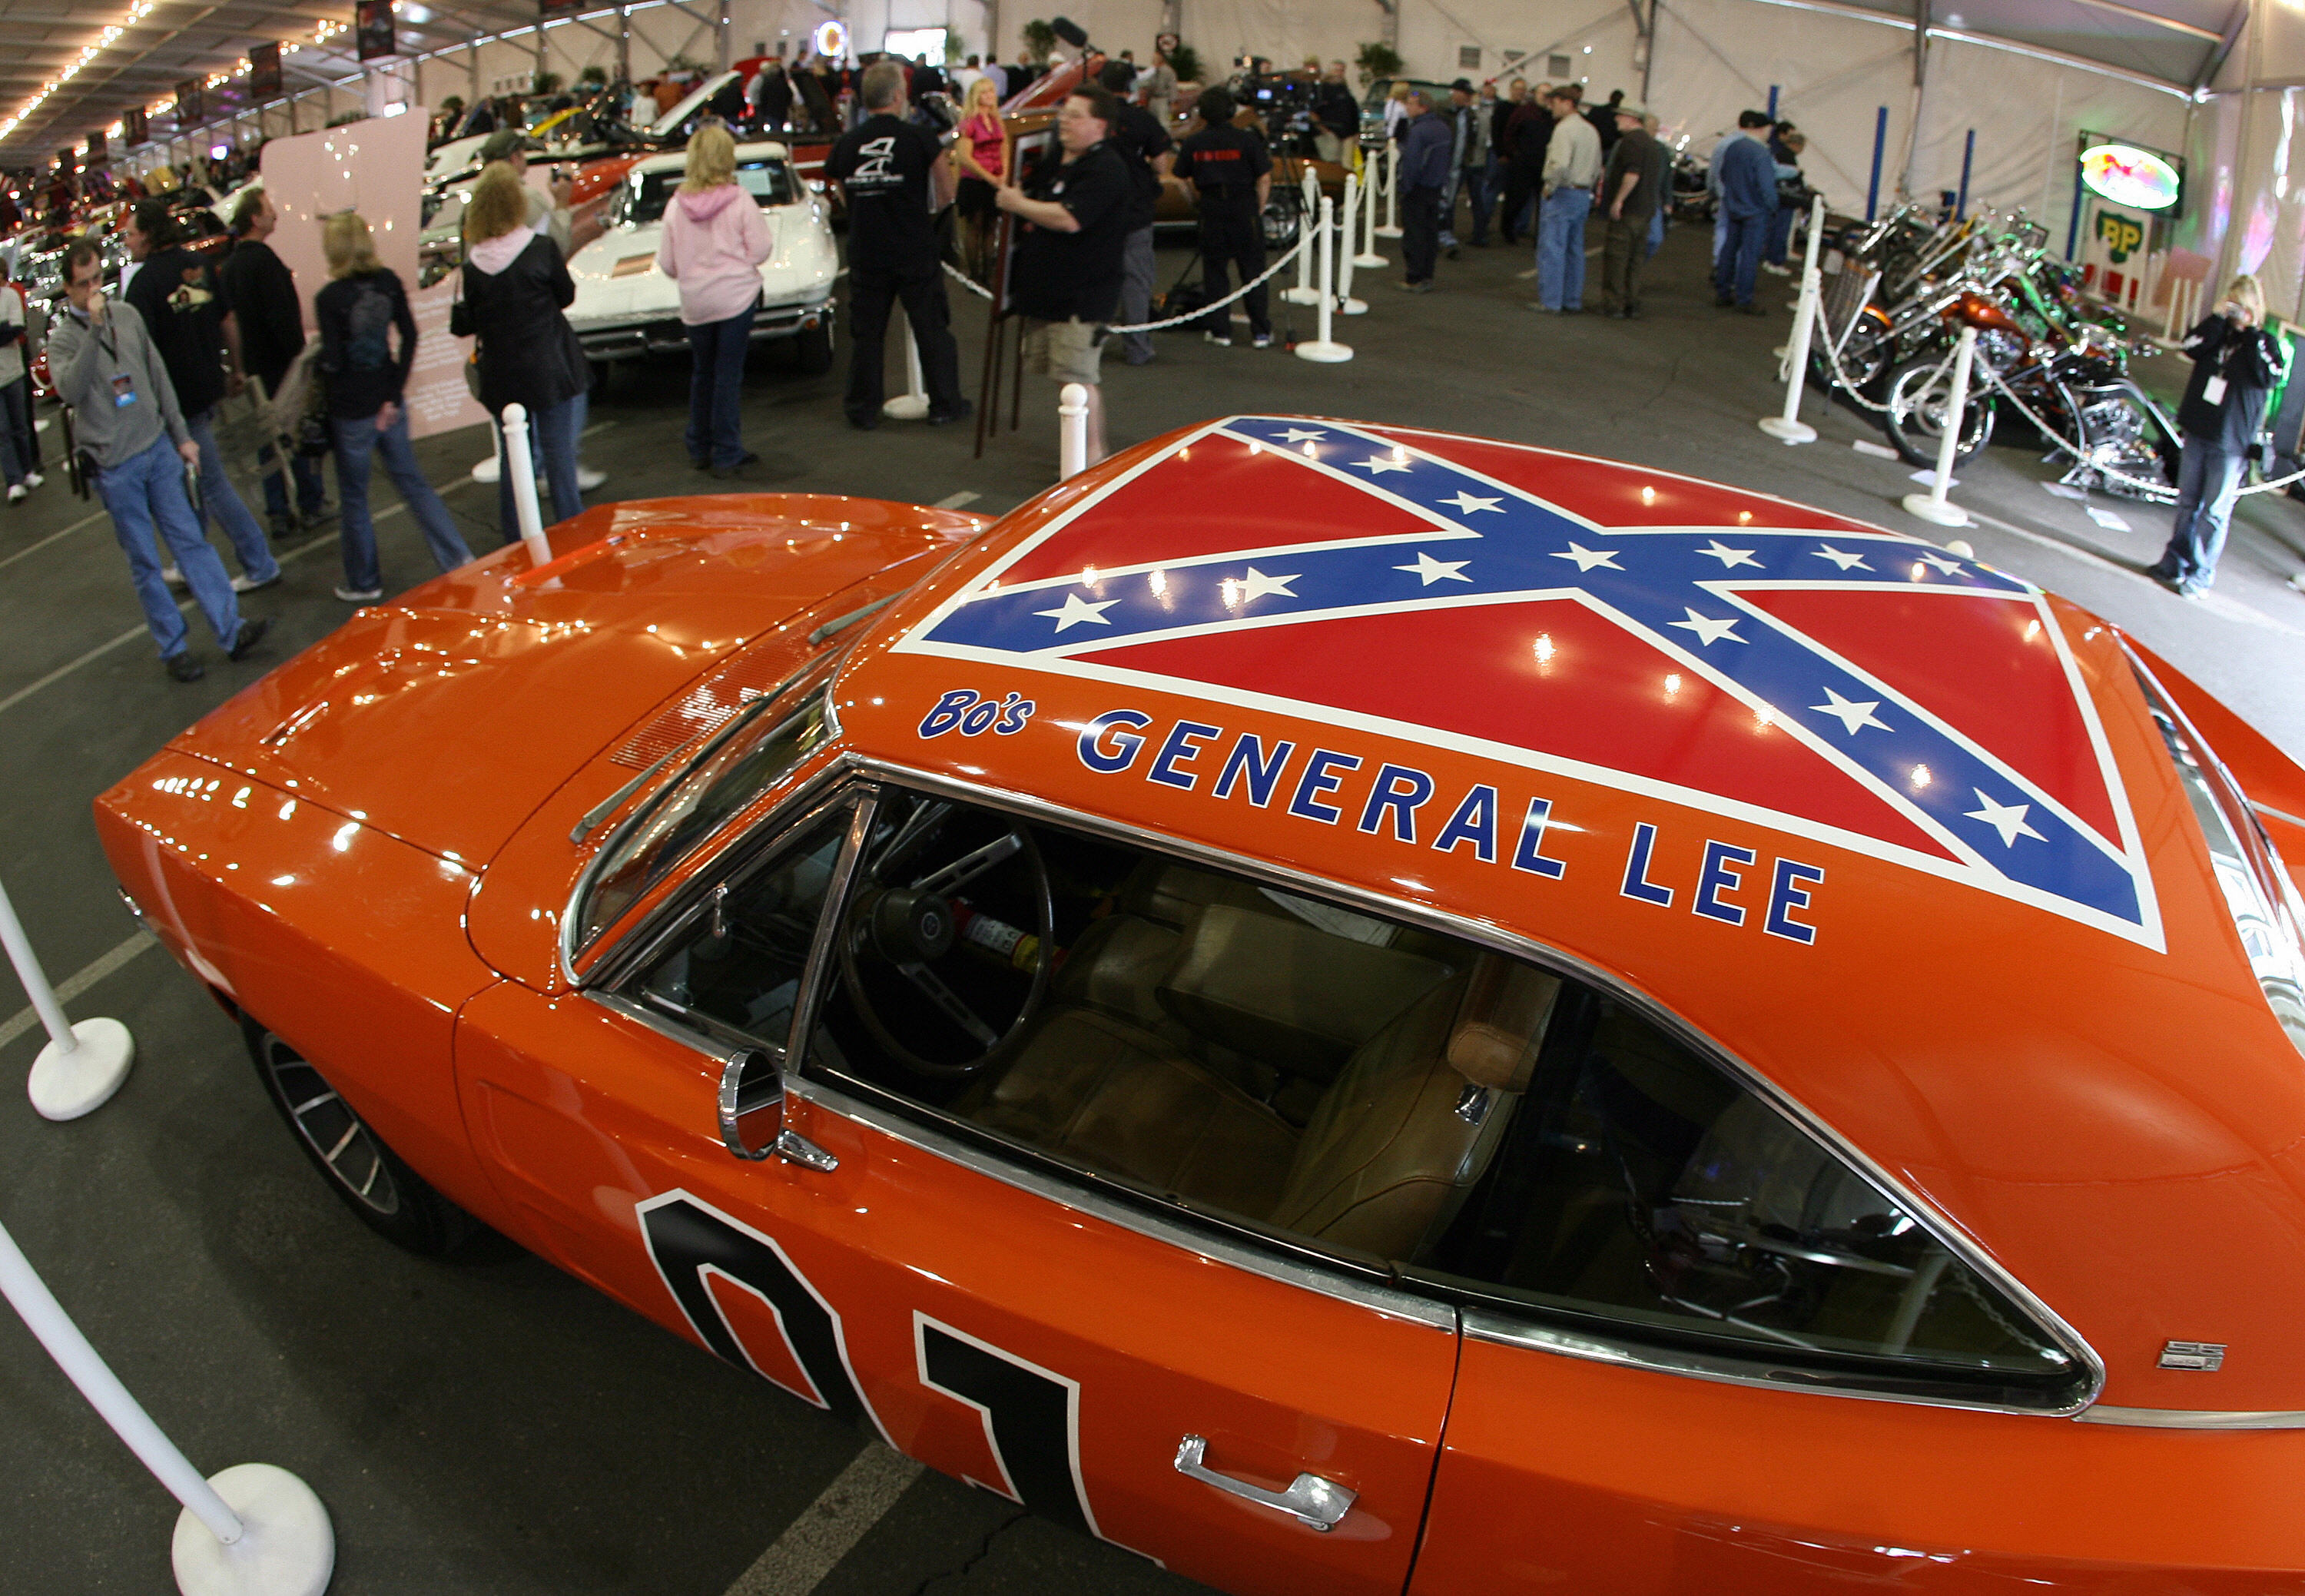 A 1969 Dodge Charger, dubbed 'The General Lee' from the TV series 'The Dukes of Hazzard', is displayed during the 37th Annual Barrett-Jackson Collector Cars auction in Scottsdale, Arizona, 16 January 2008. The Barrett-Jackson auction company specializes in classic and collectors cars, and their auction in Scottsdale is the world's largest collector car event. (Gabriel Bouys—AFP/Getty Images)